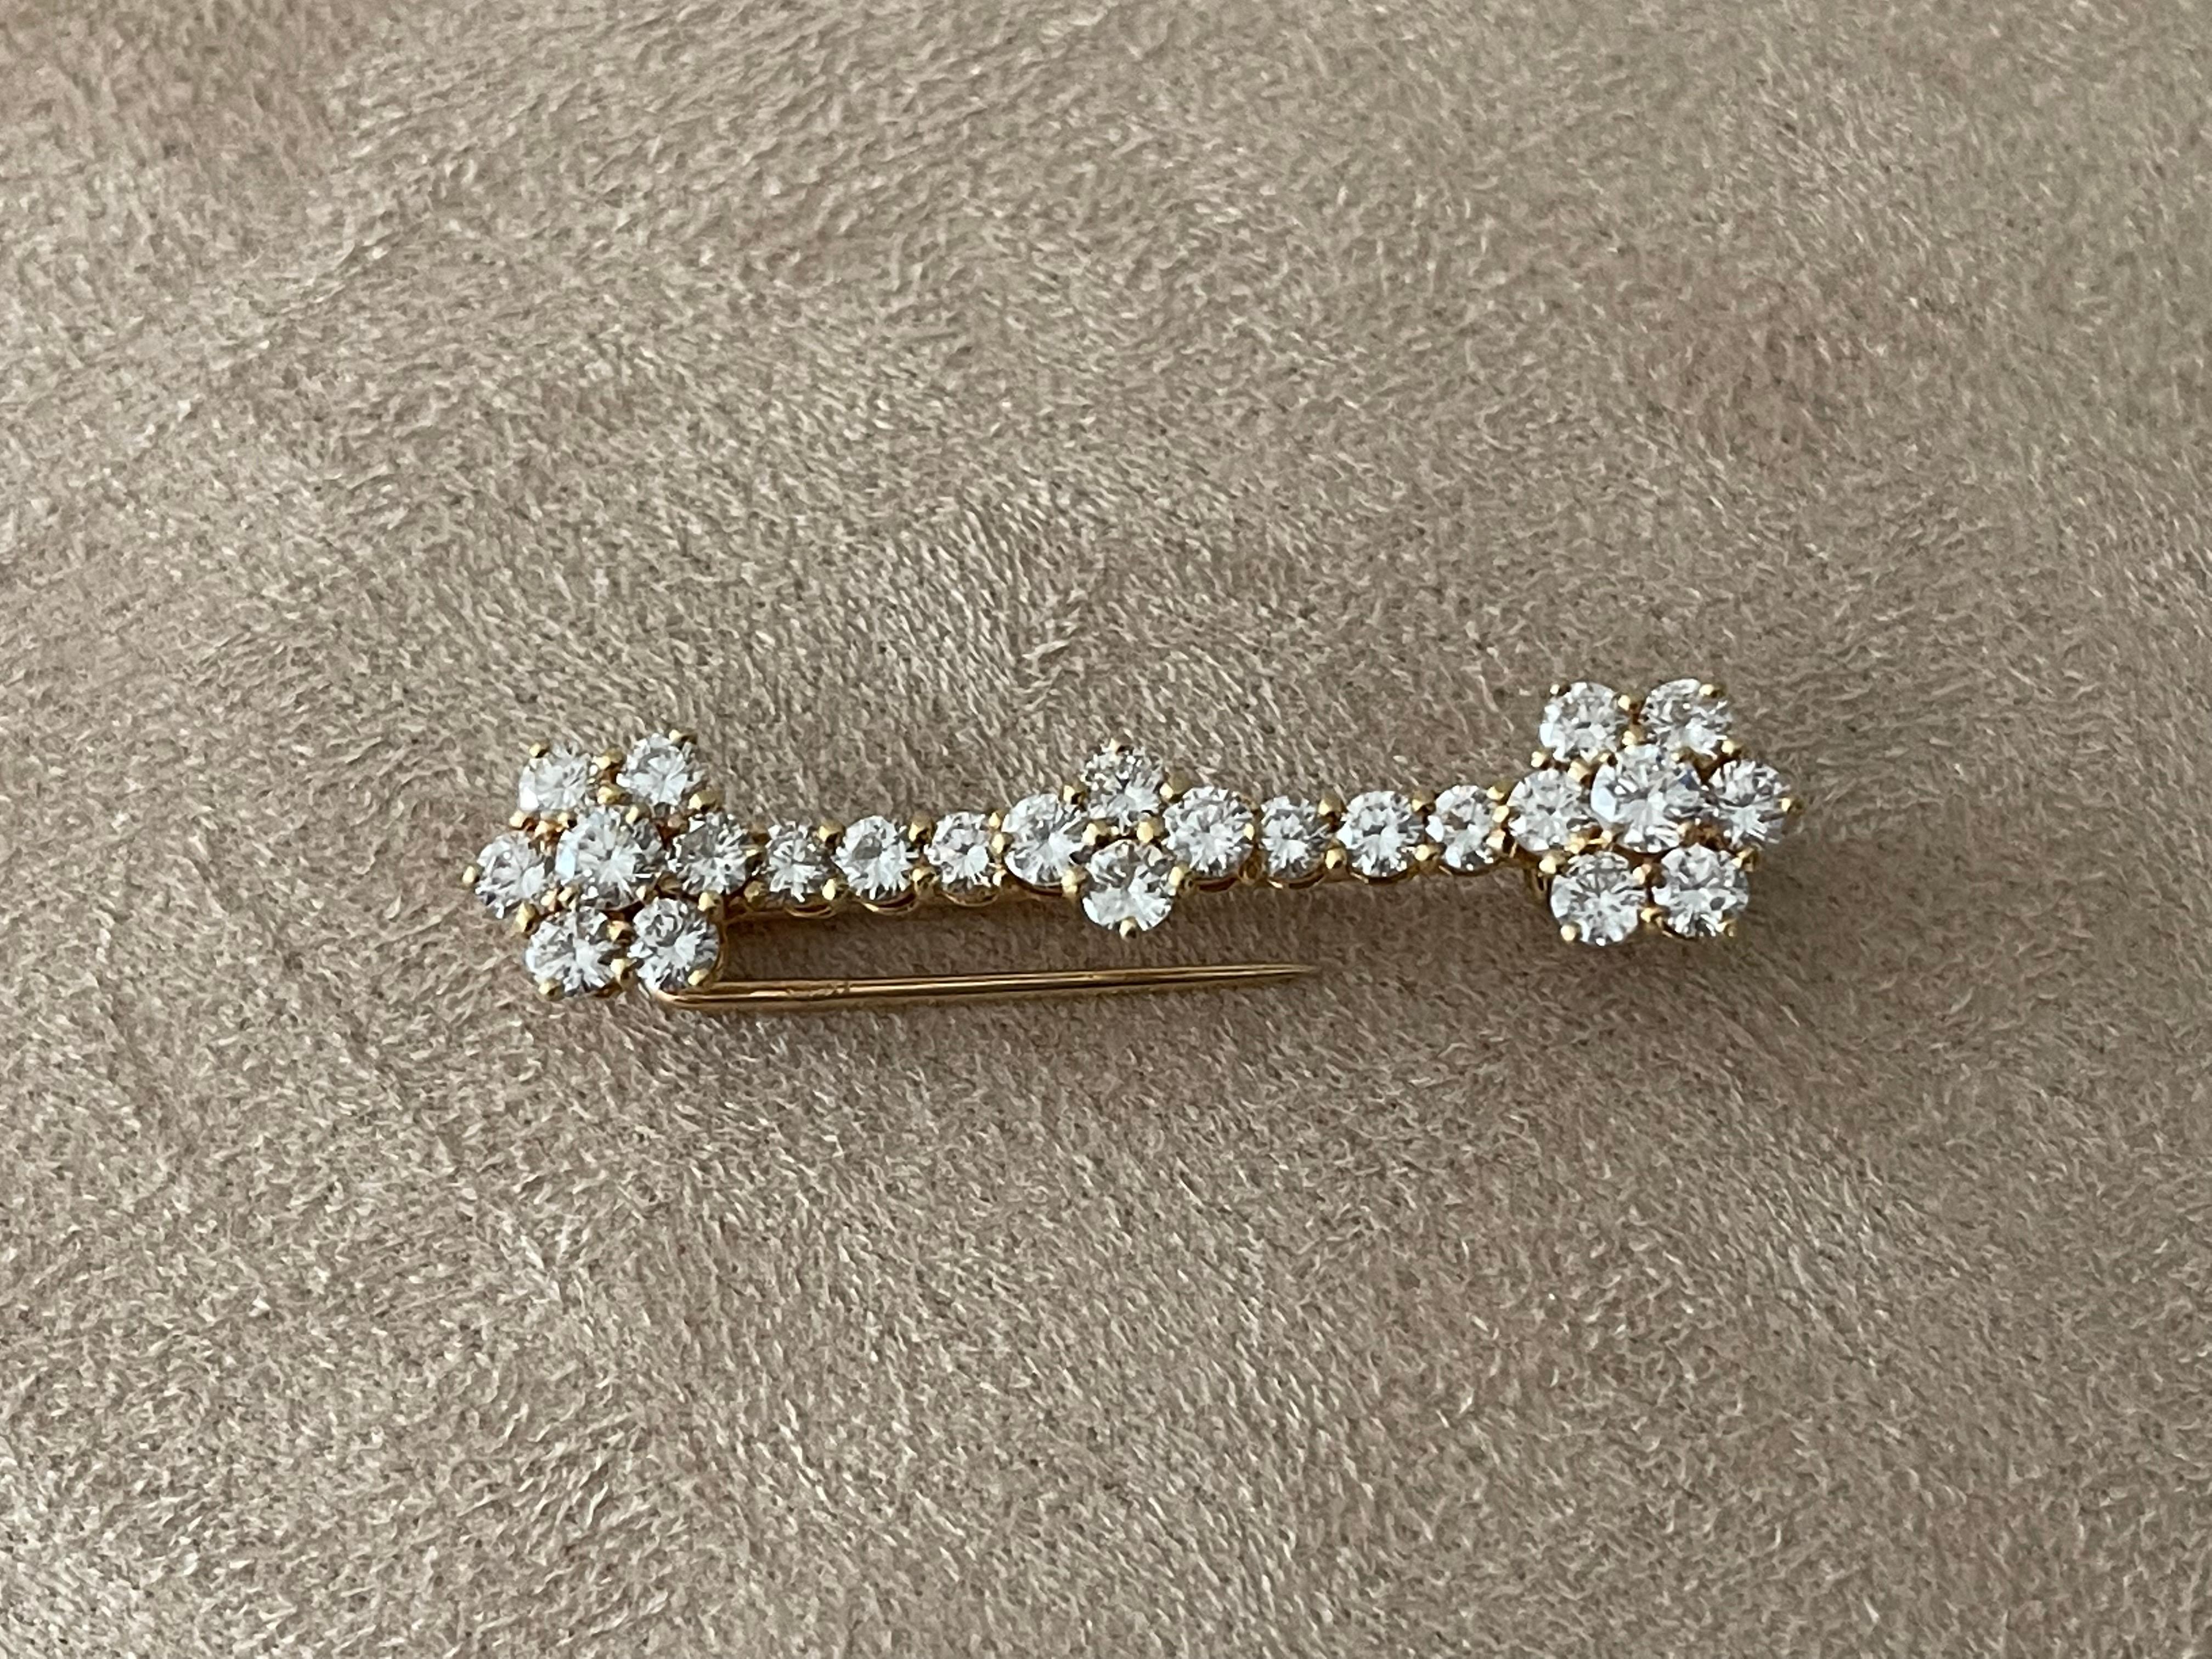 Elegant and timeless bar pin brooch crafted in 18 K yellow Gold set with 24 fine brilliant cut Diamonds weighing approximately 3.60 ct,  F color, vvs clarity. Length: 4.5 cm. Signed and numbered. 
Masterfully handcrafted piece! Authenticity and